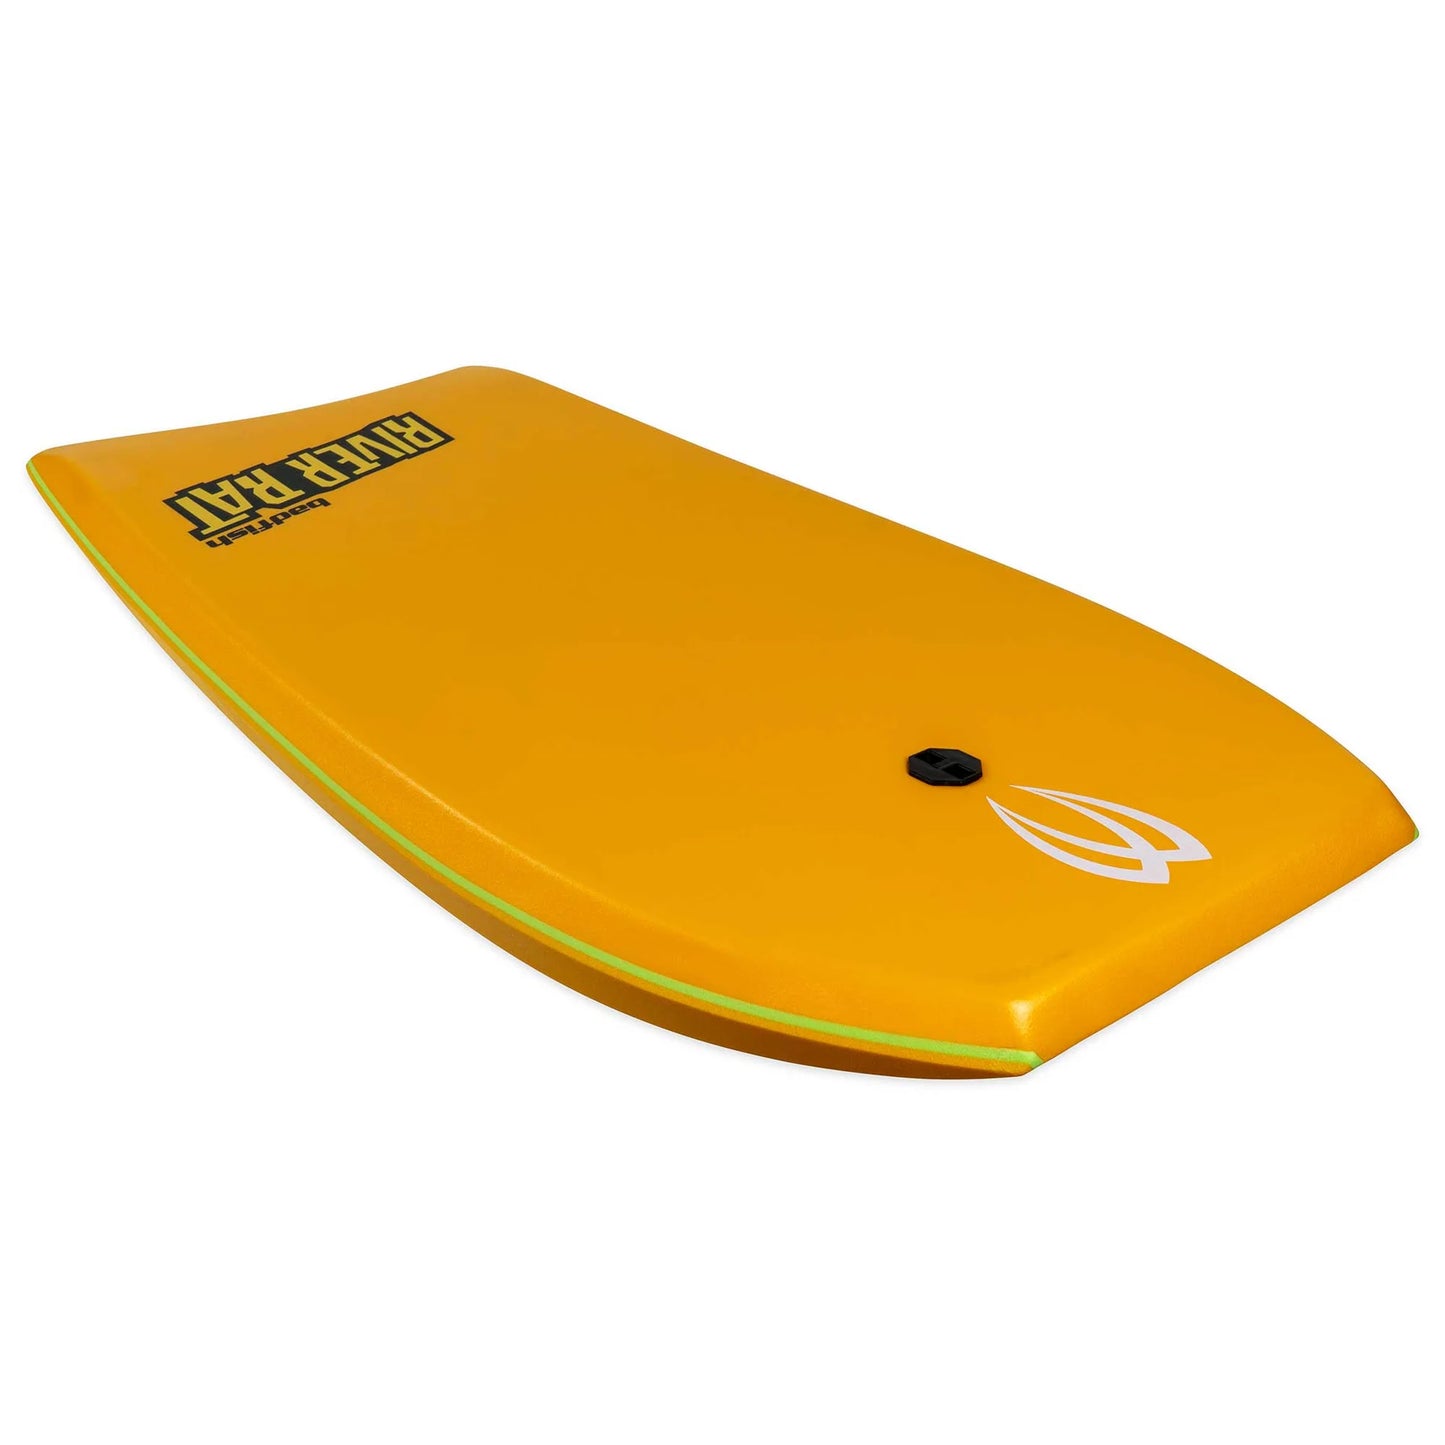 A yellow River Rat surf body board with a black button by Badfish.